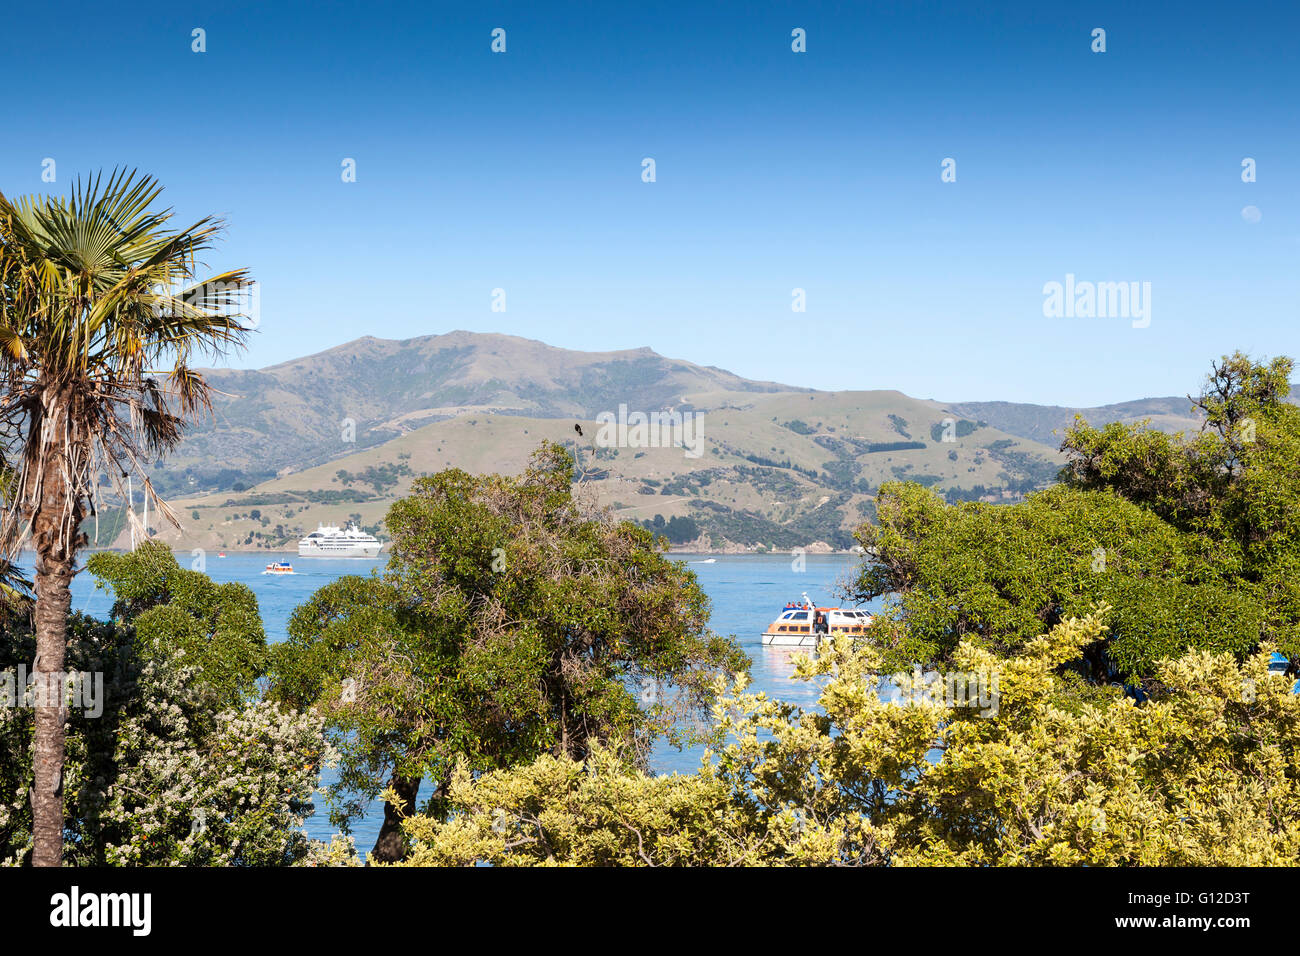 Akaroa harbour with Le Soleal cruise ship in the background, New Zealand Stock Photo